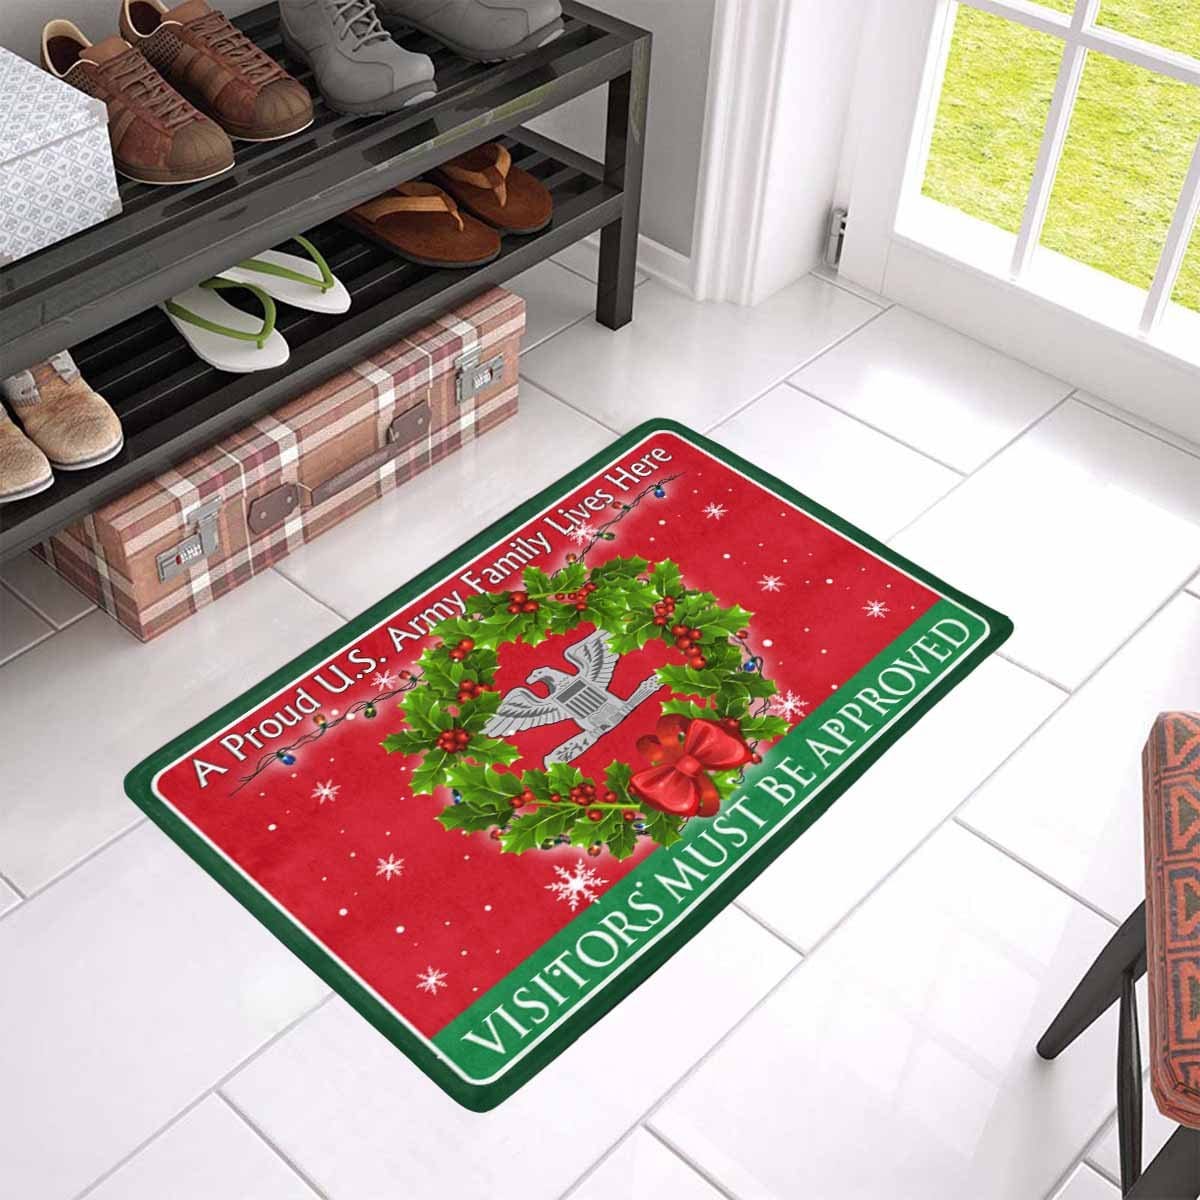 US Army O-6 Colonel O6 COL Field Officer Ranks - Visitors must be approved Christmas Doormat-Doormat-Army-Ranks-Veterans Nation